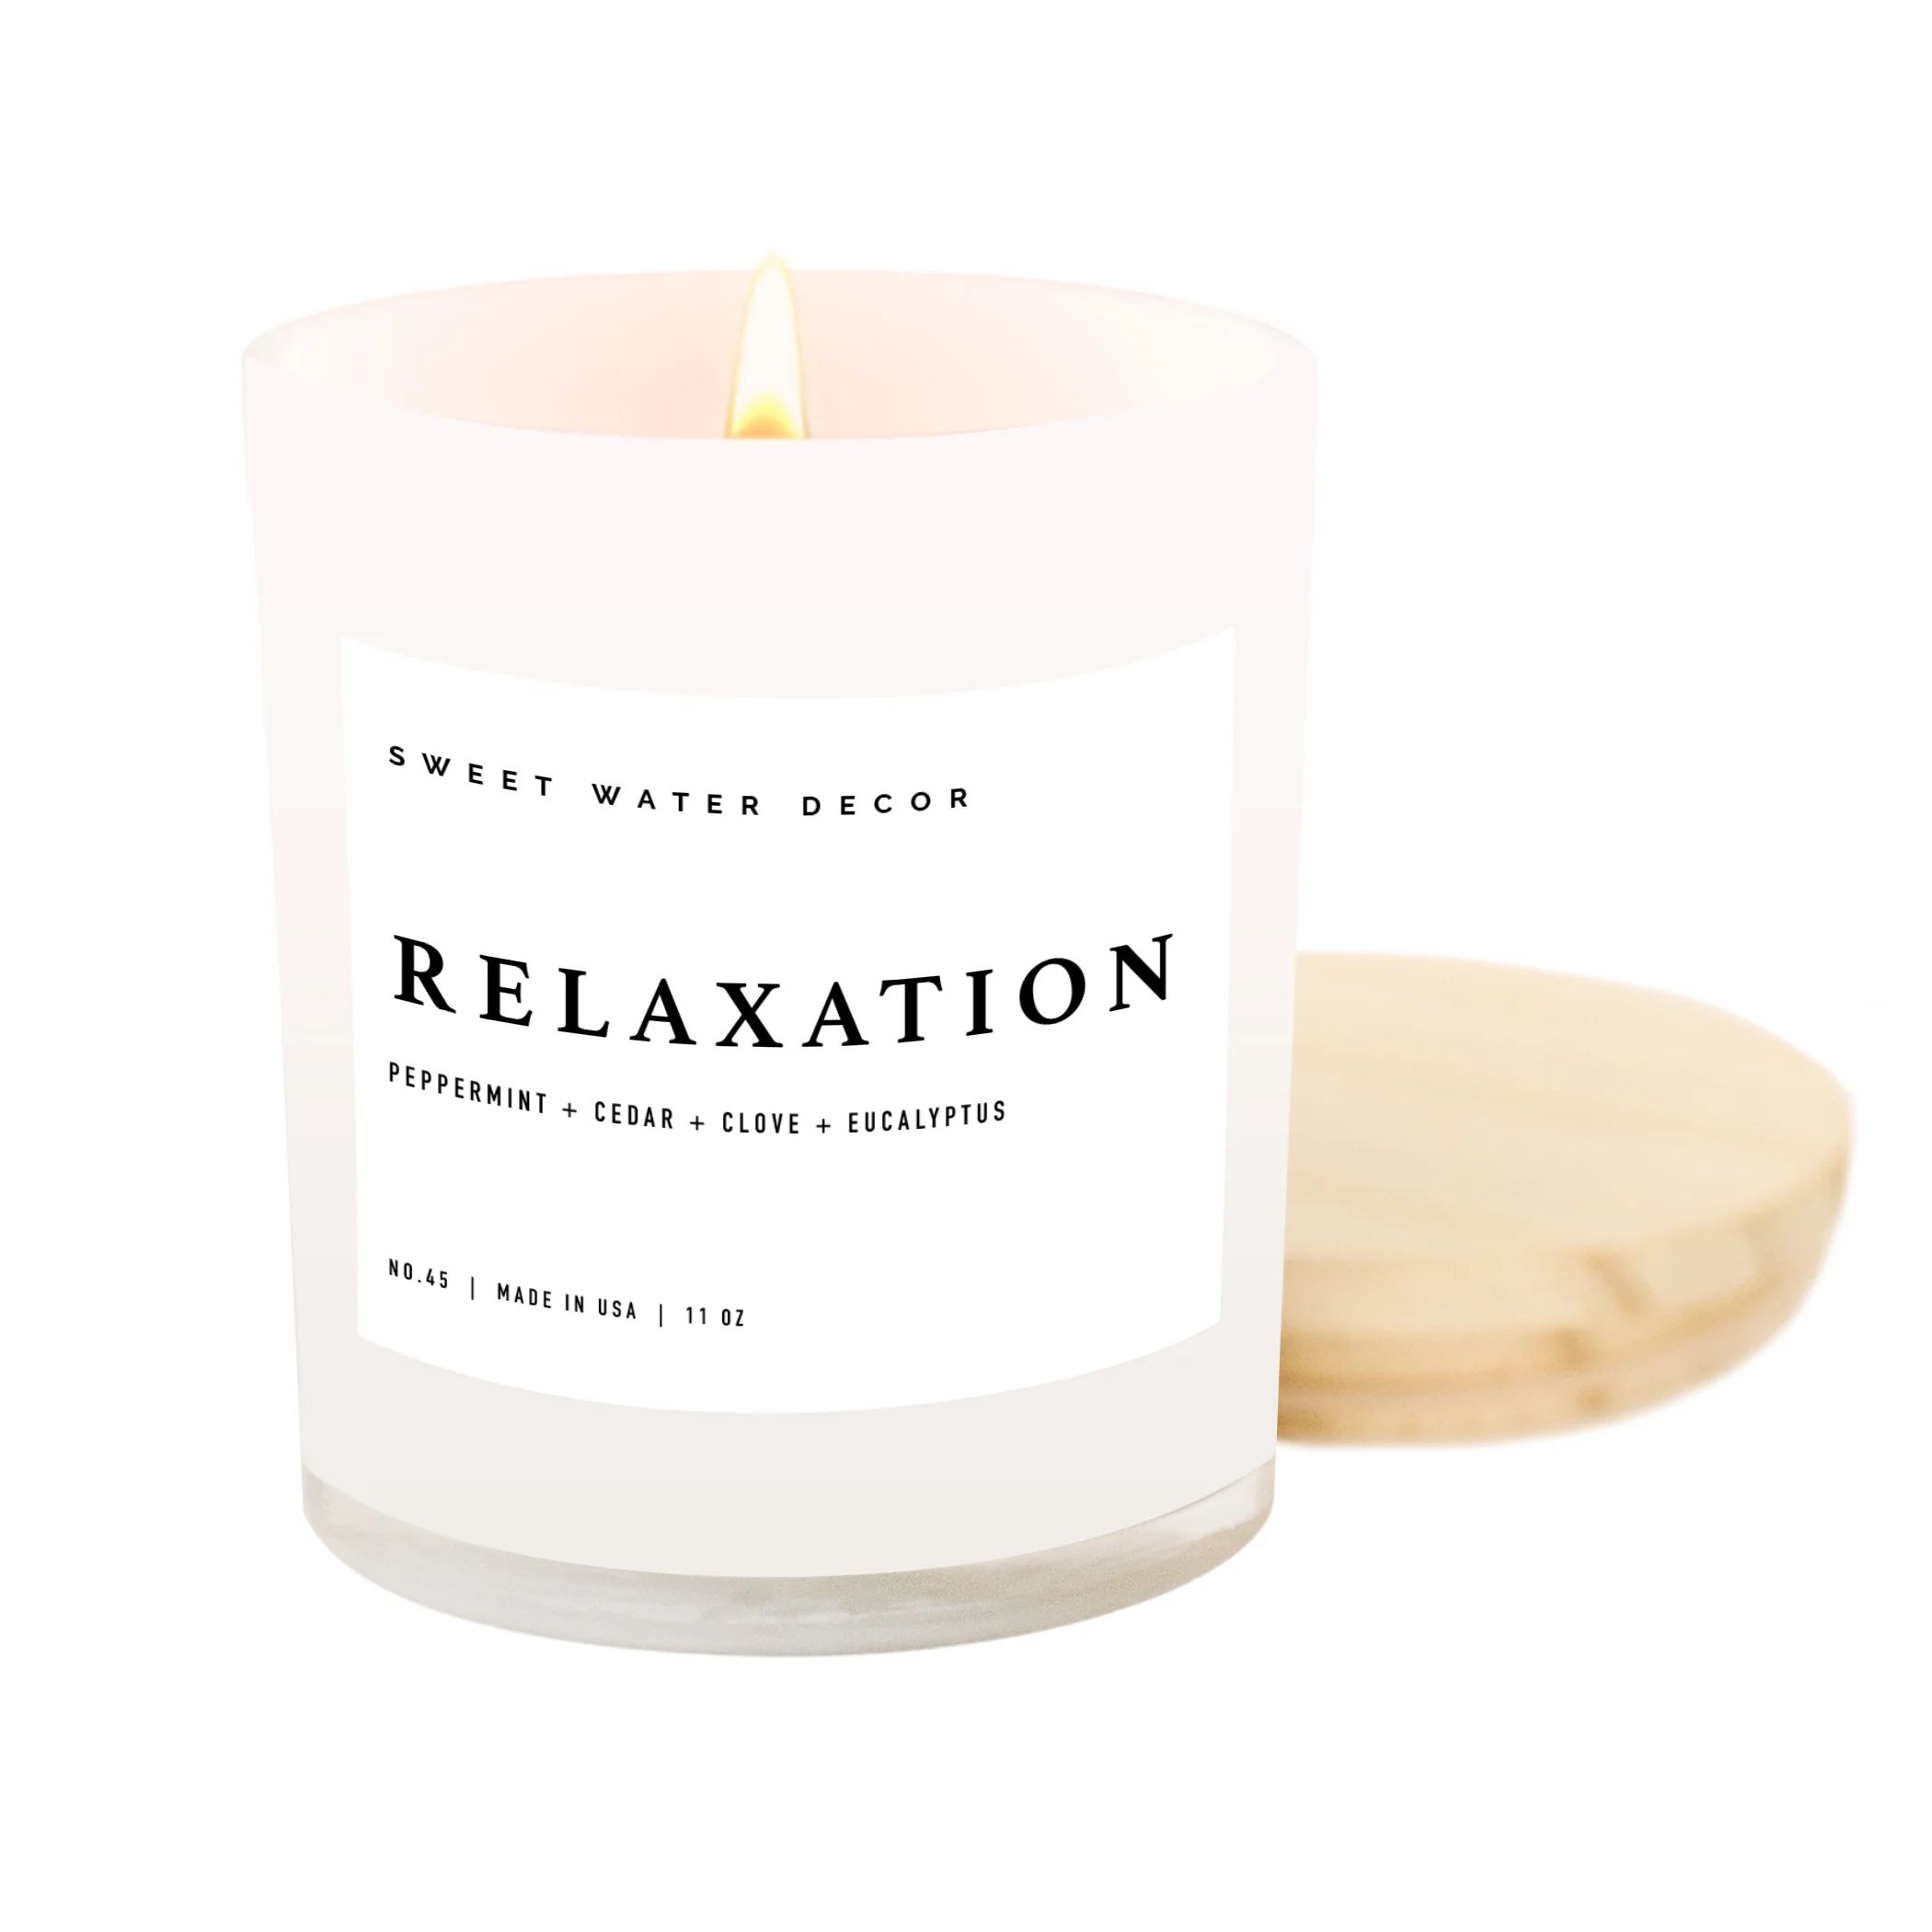 Relaxation Soy Candle - White Jar - 11 oz | Sweet Water Decor, LLC